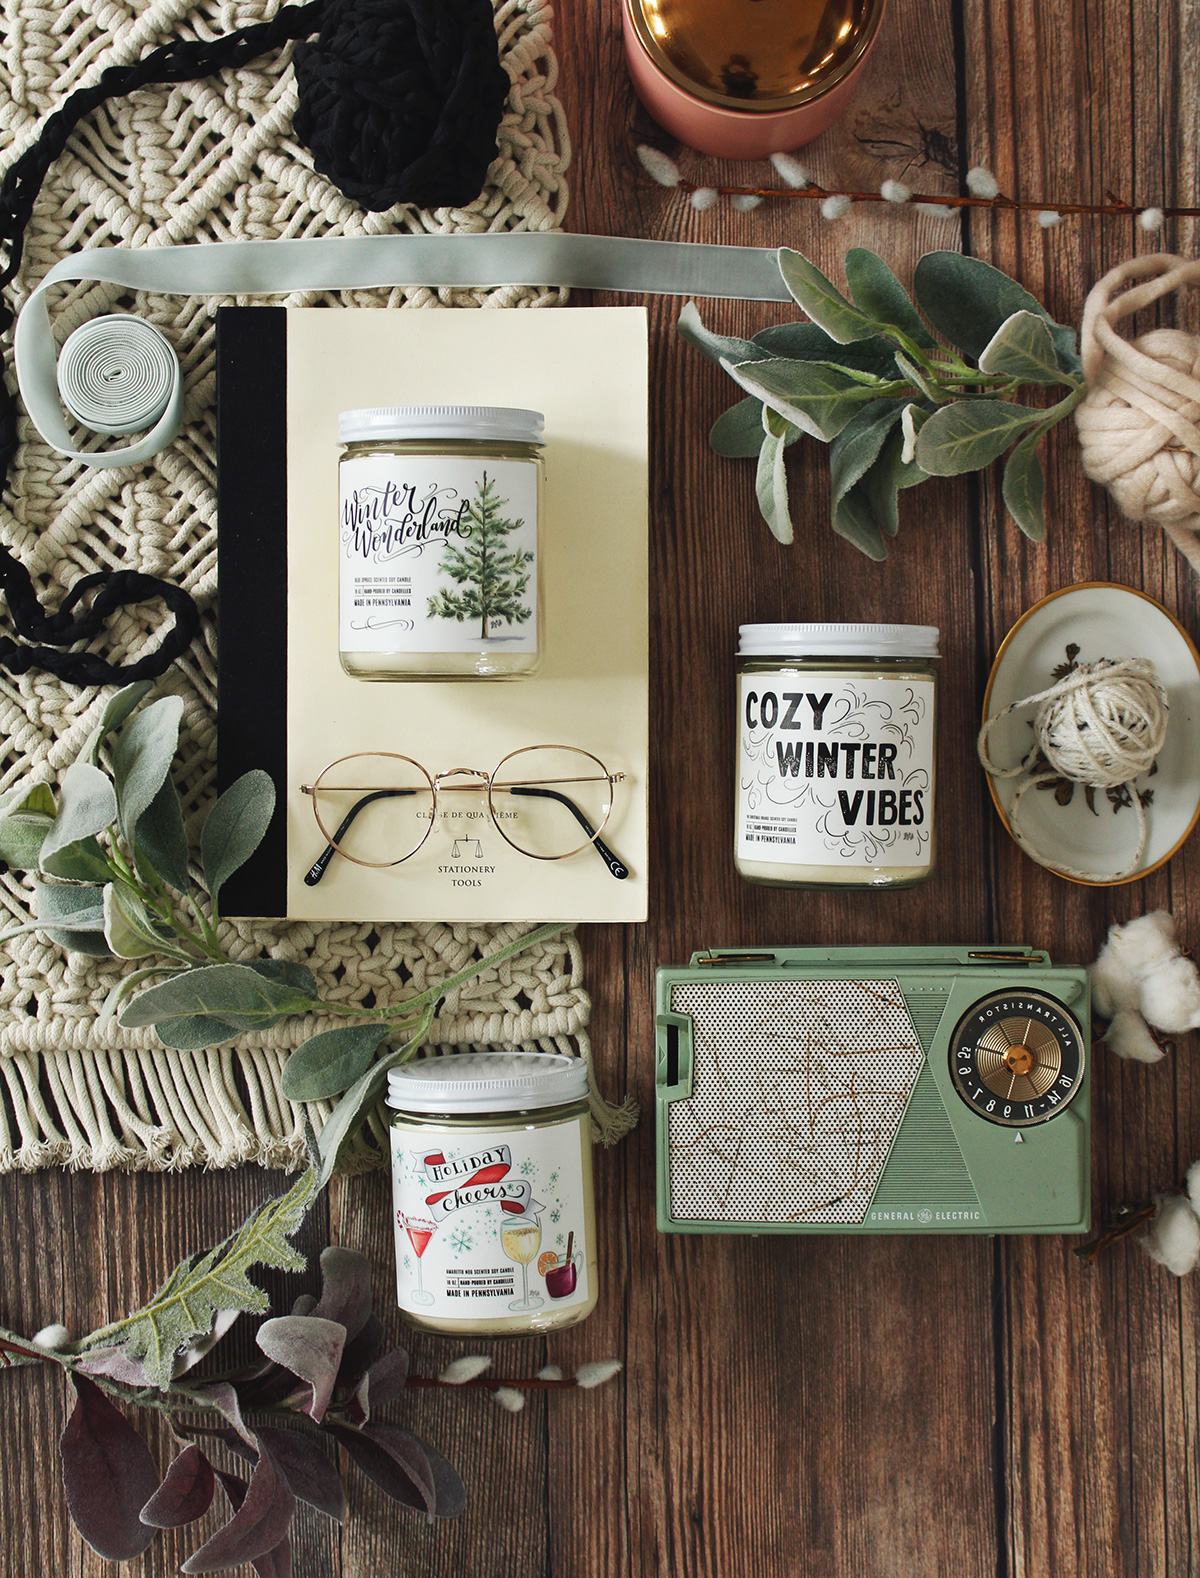 Unique holiday soy candles with labels hand-drawn by Lily & Val and hand-poured by Candelles